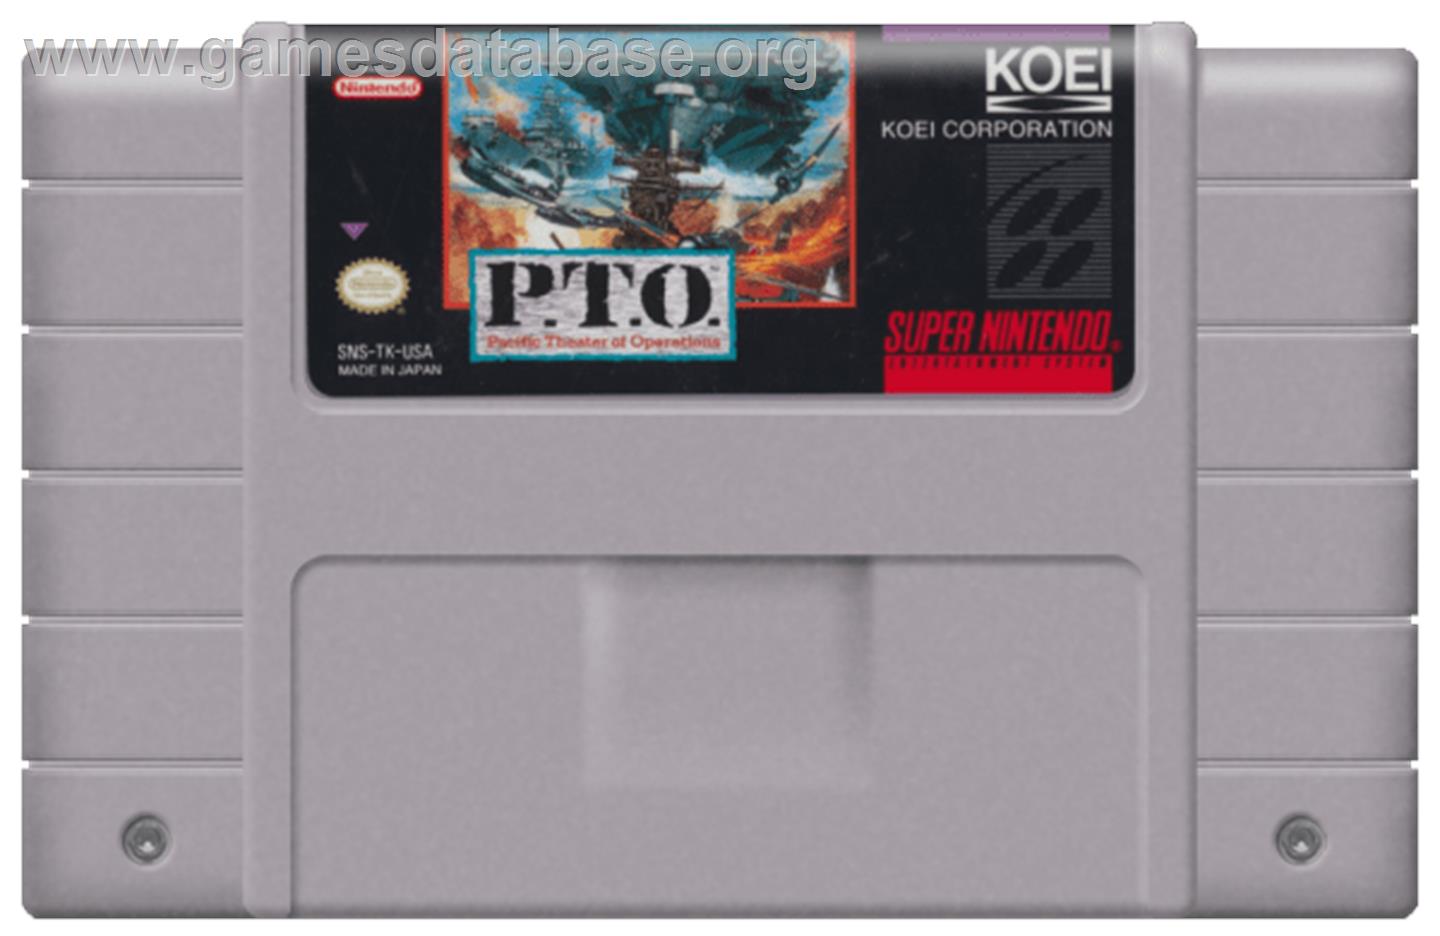 P.T.O.: Pacific Theater of Operations - Nintendo SNES - Artwork - Cartridge